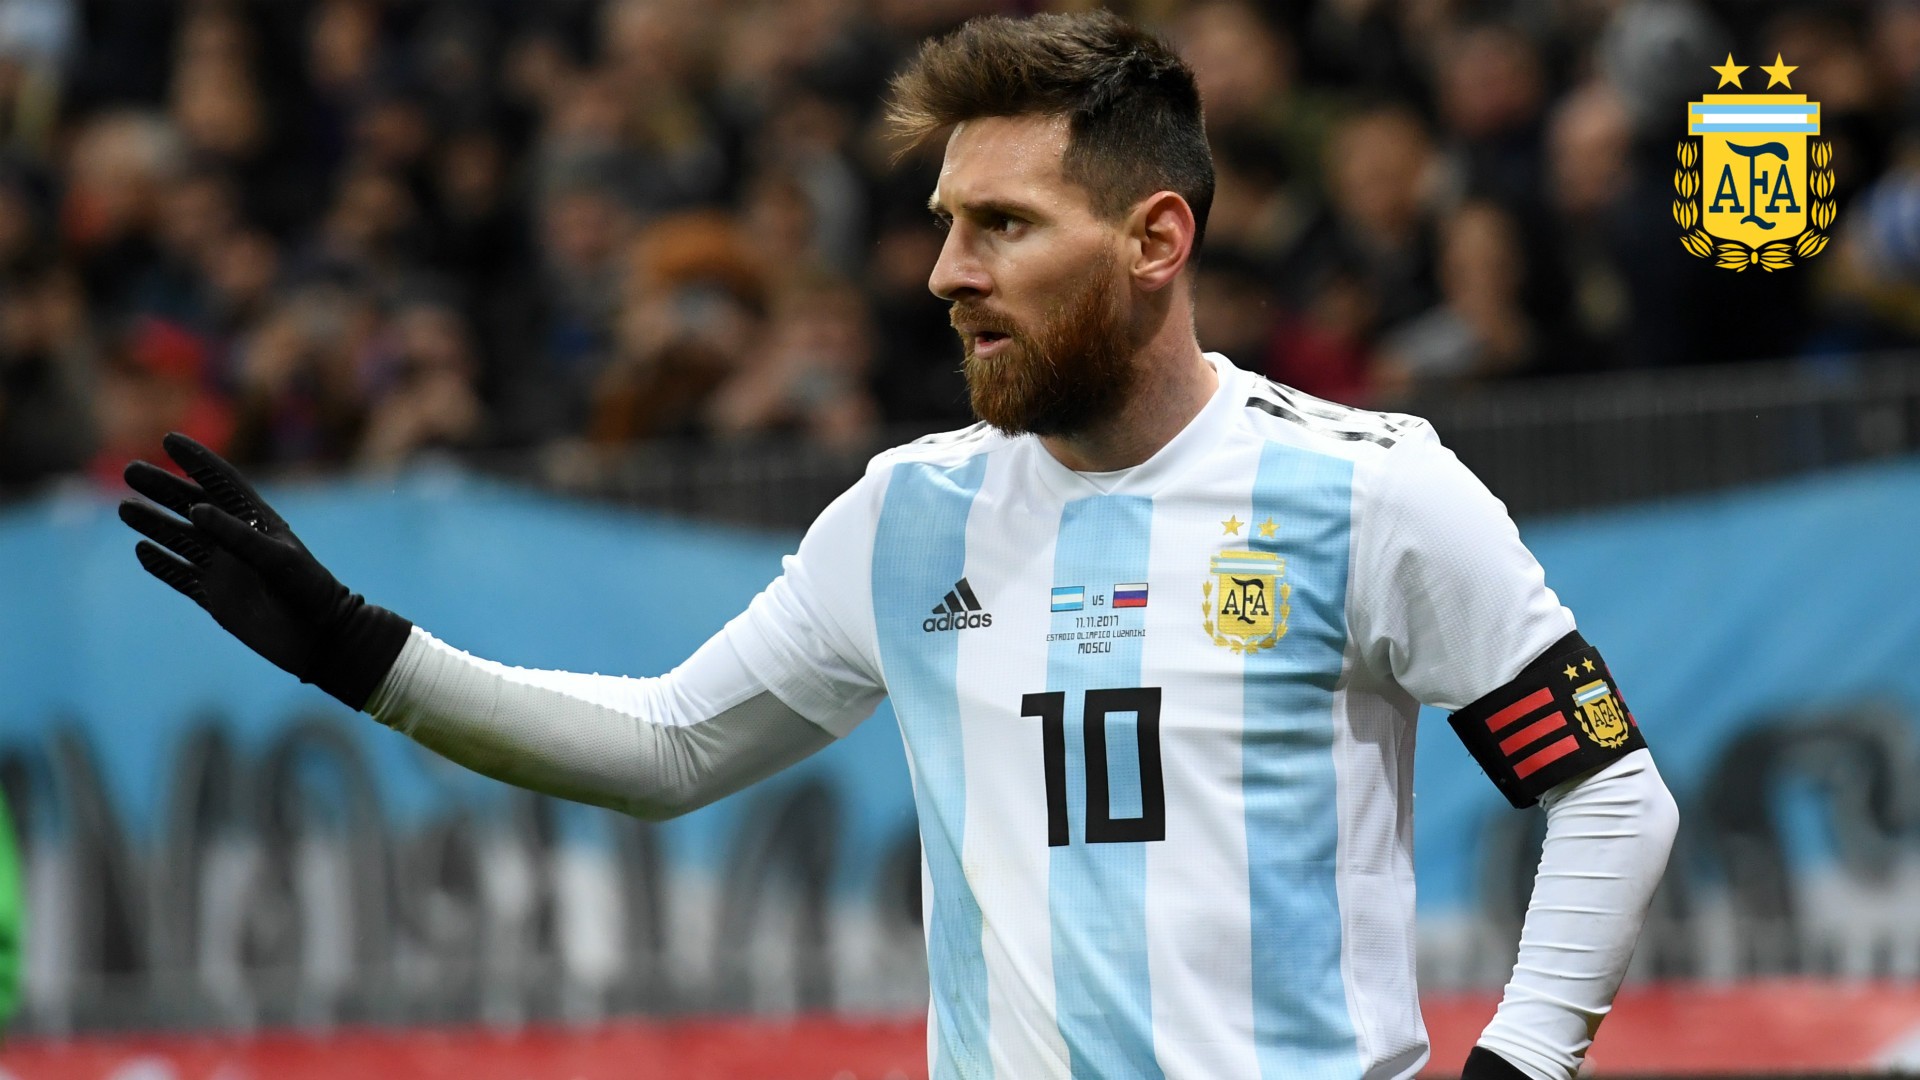 Messi Argentina For PC Wallpaper With Resolution 1920X1080 pixel. You can make this wallpaper for your Mac or Windows Desktop Background, iPhone, Android or Tablet and another Smartphone device for free